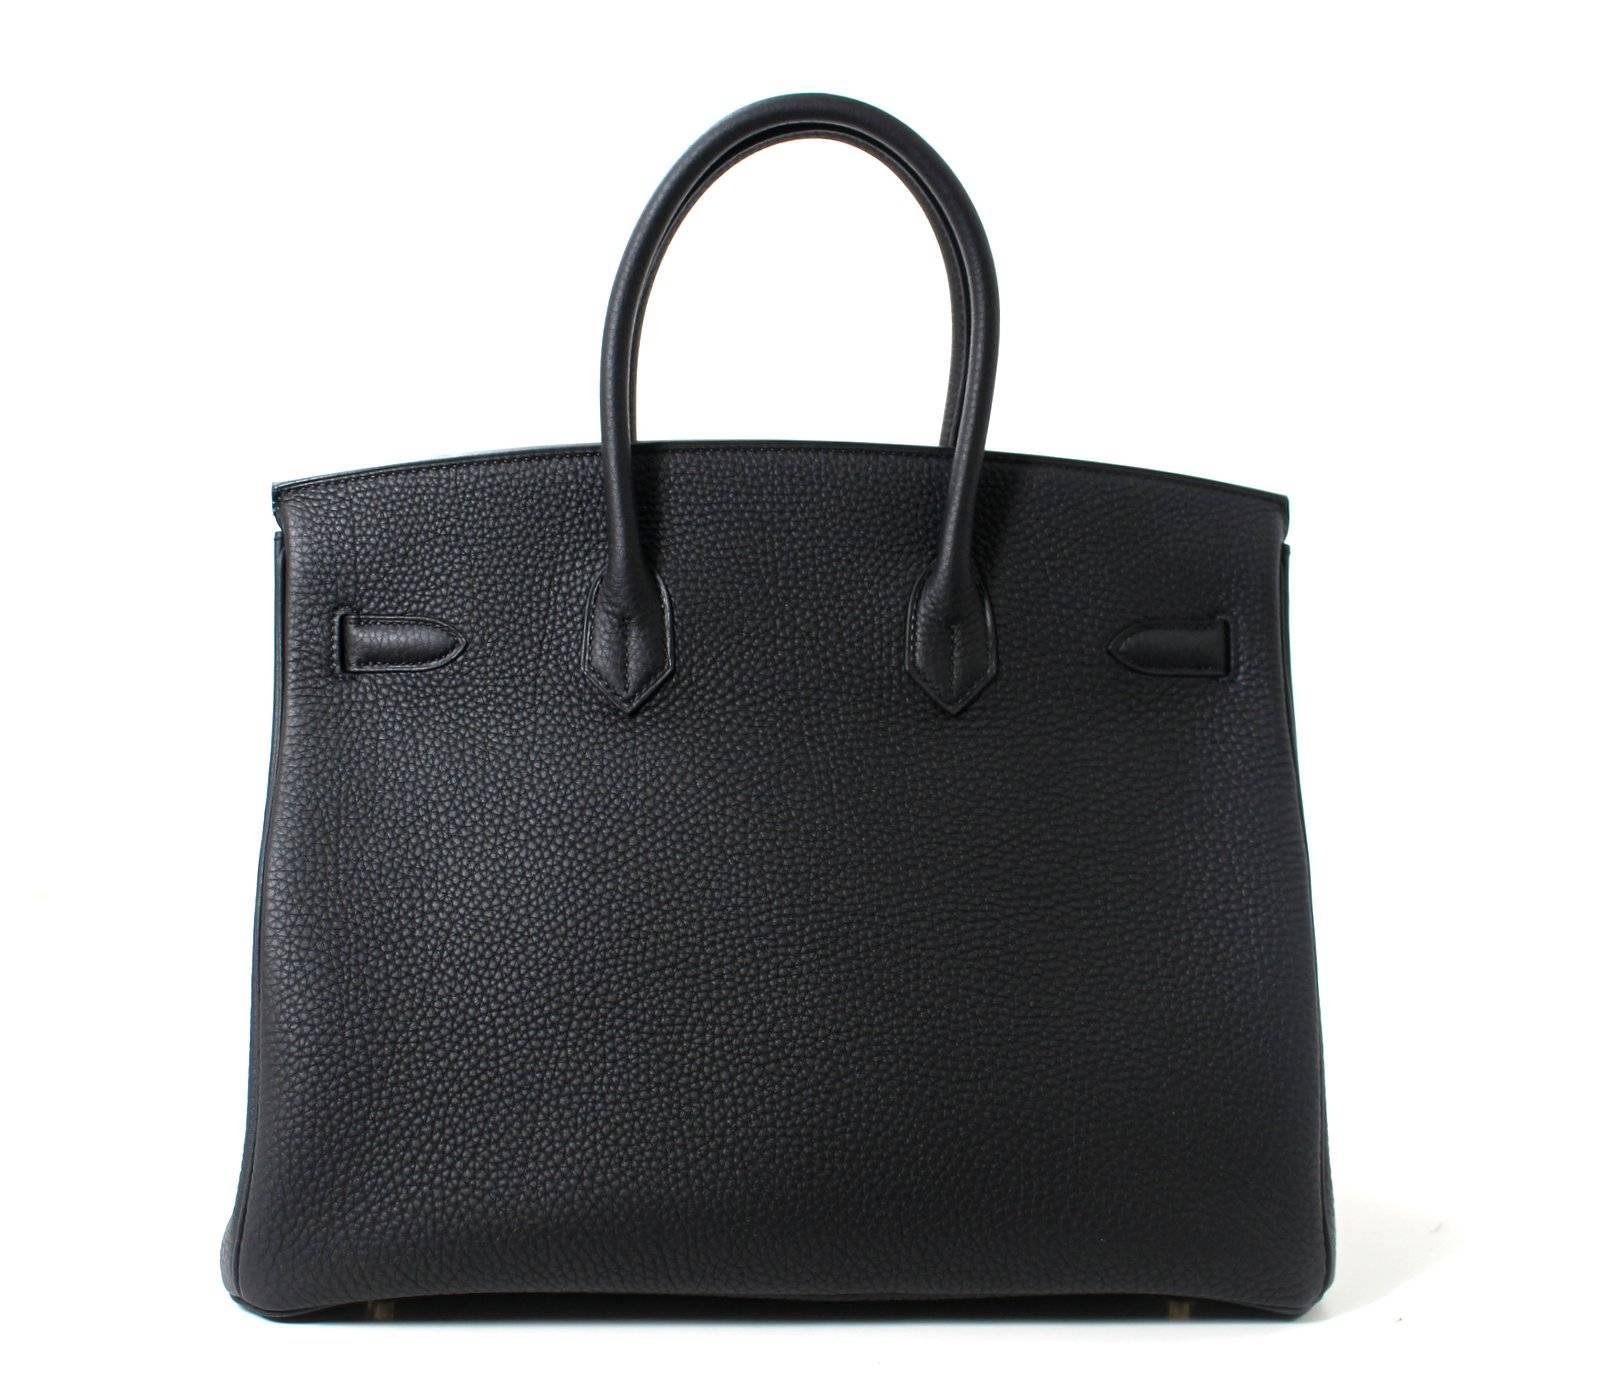 Pristine, store fresh condition (plastic on hardware) Hermès Birkin Bag in BLACK Togo Leather with GOLD hardware, 35 cm size T stamp
Crafted by hand and considered by many as the epitome of luxury items, Birkins are in extremely high demand but